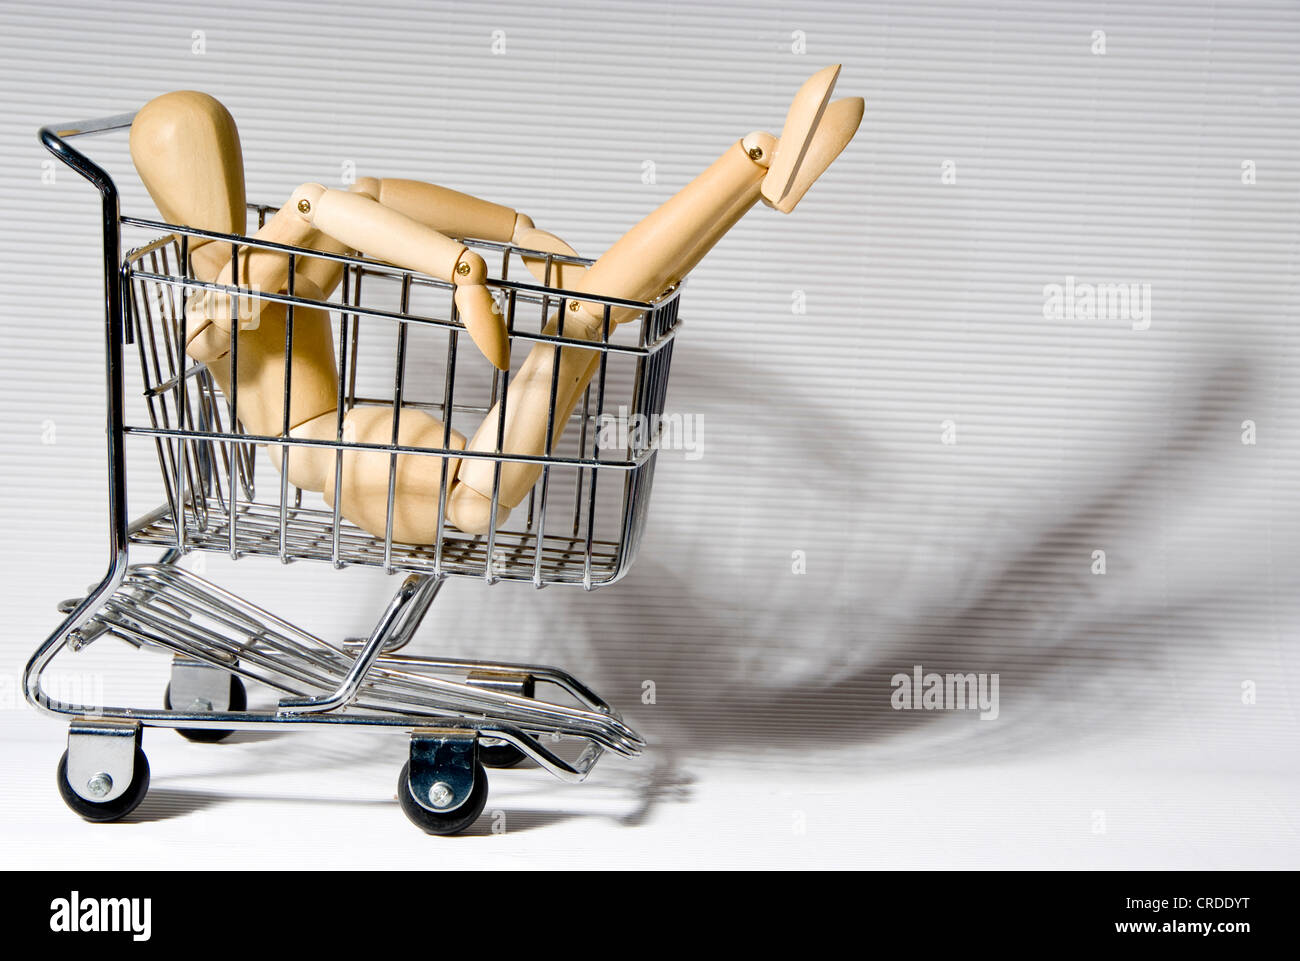 jointed doll in shopping trolley Stock Photo